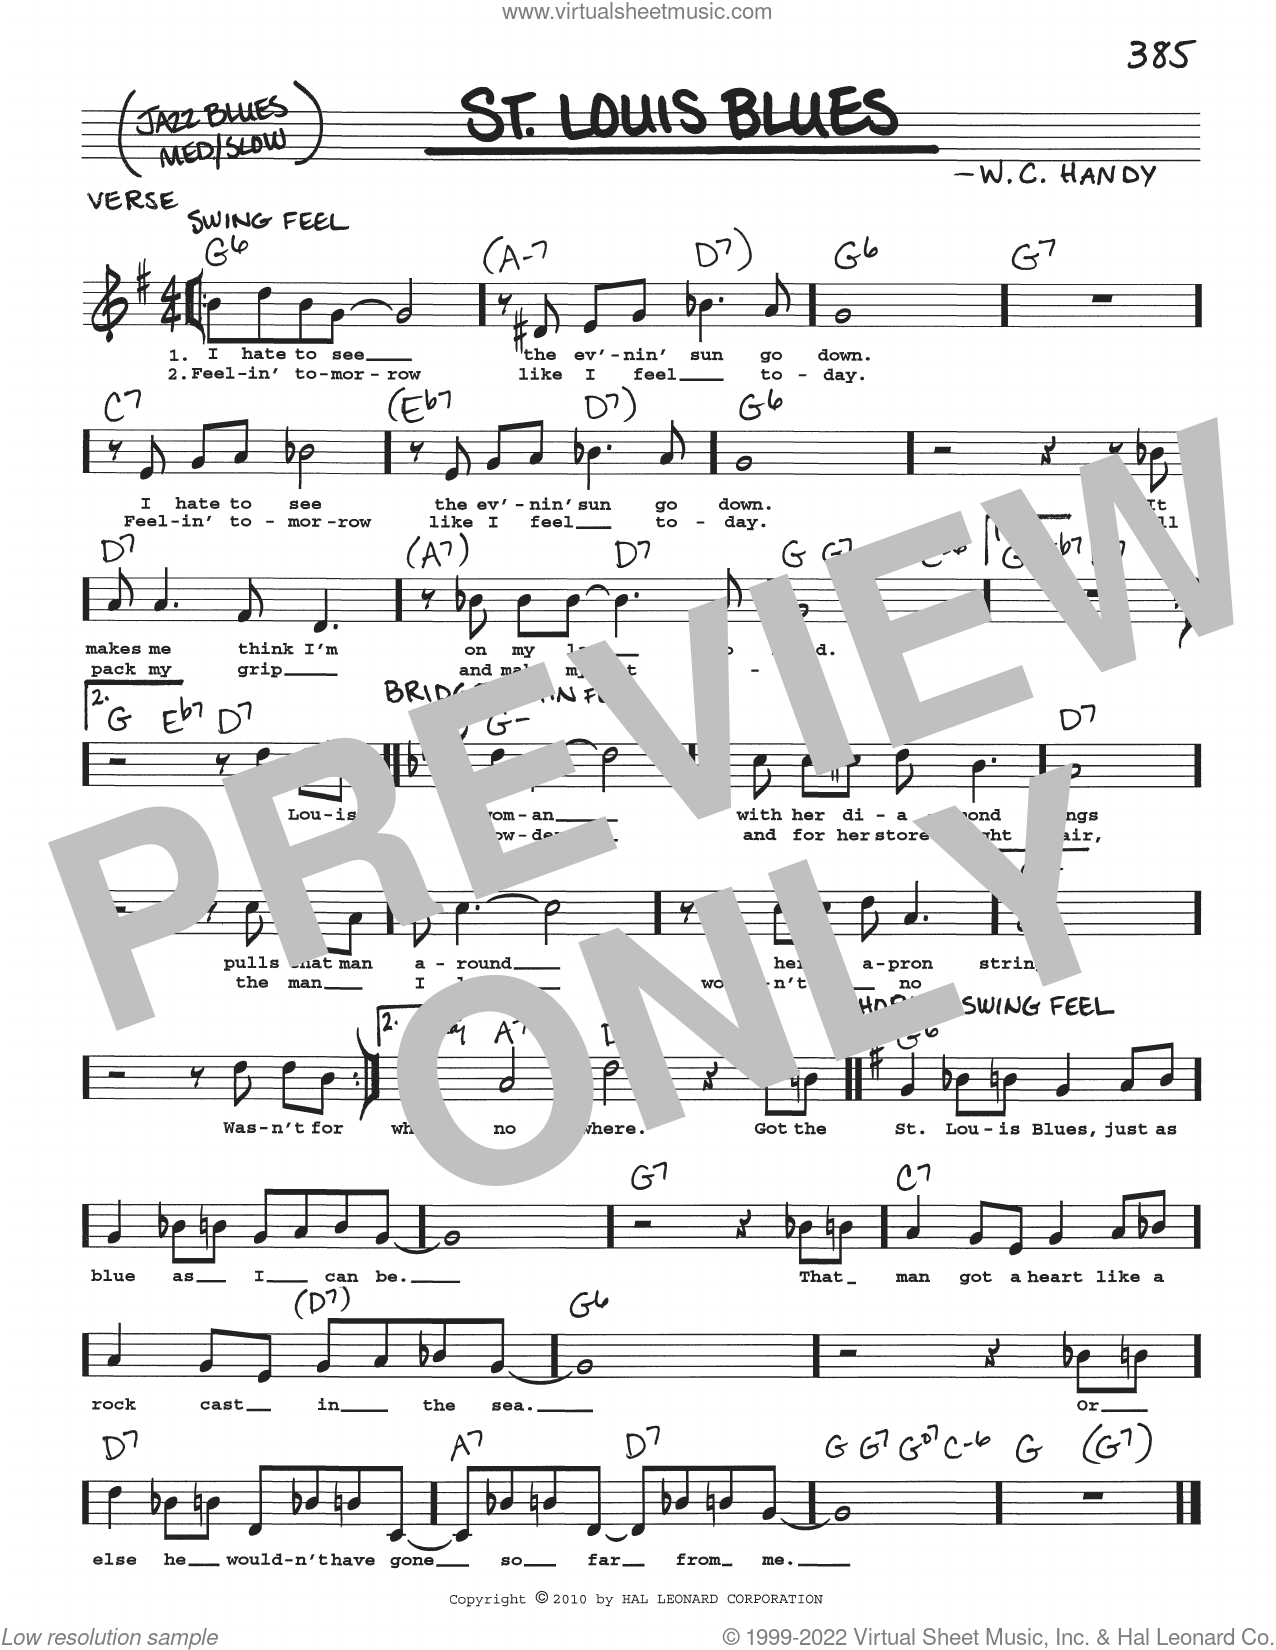 St. Louis Blues Sheet music for Piano (Solo)